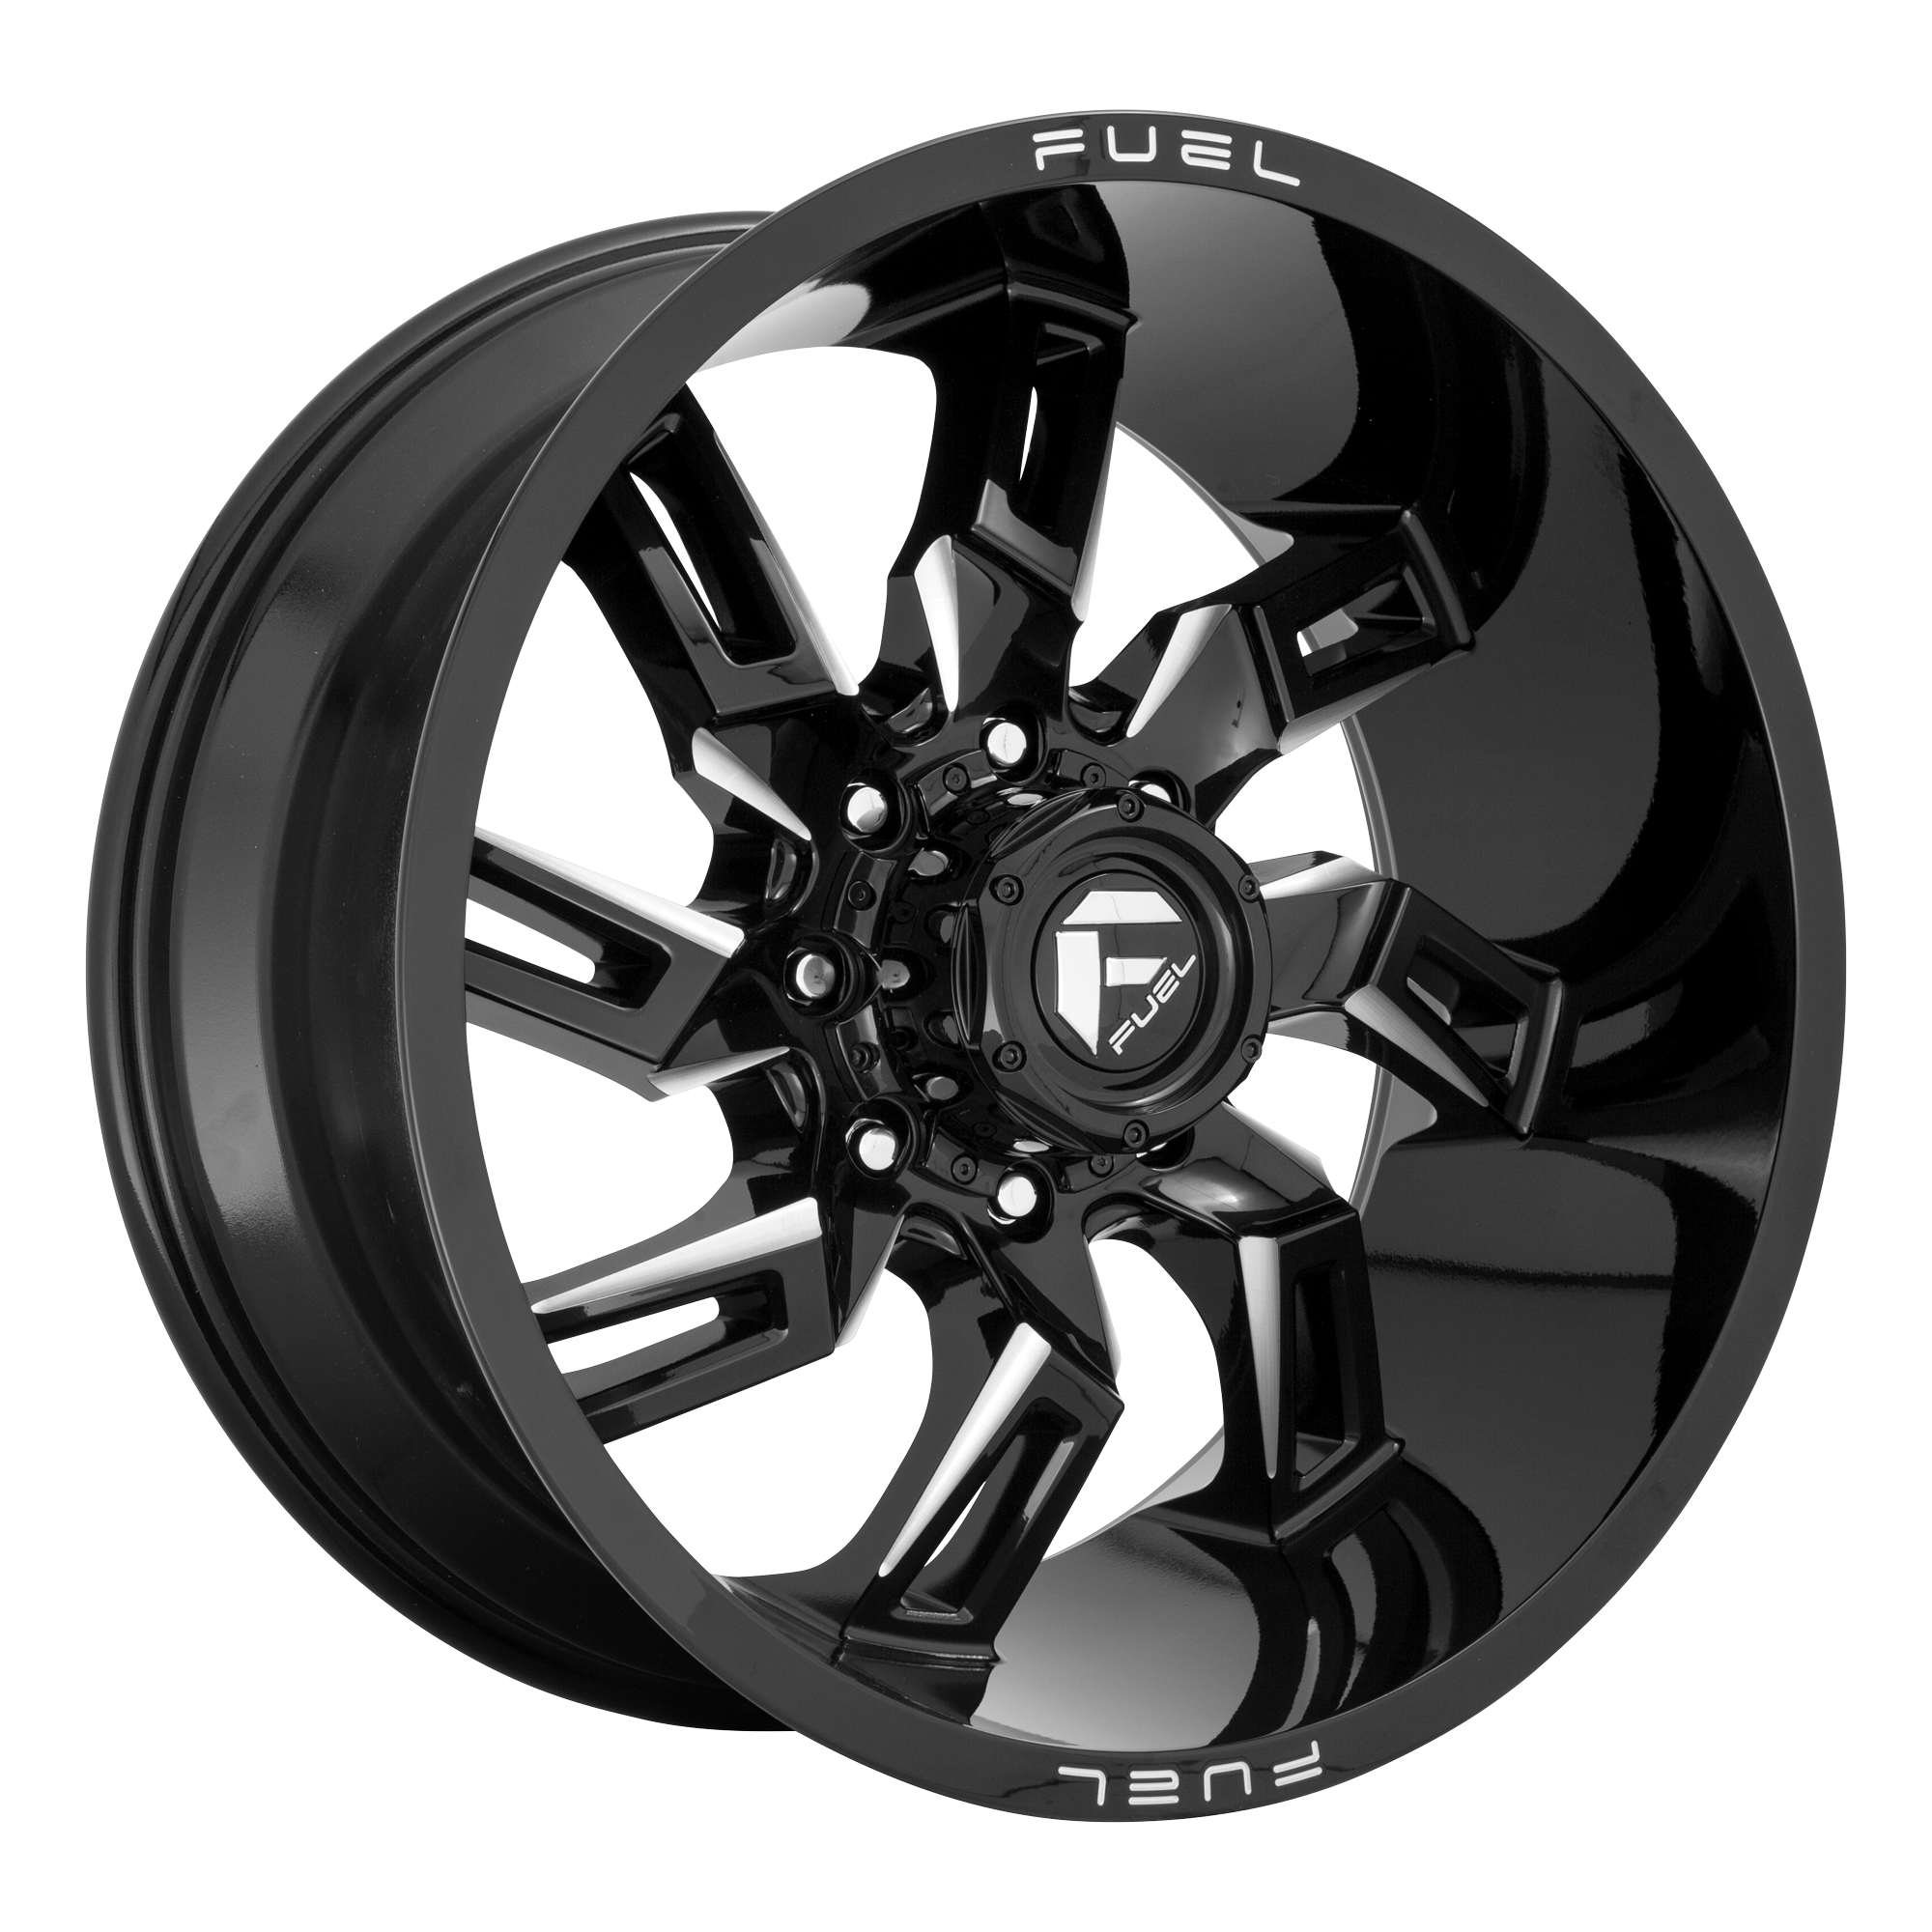 LOCKDOWN 20x10 8x170.00 GLOSS BLACK MILLED (-18 mm) - Tires and Engine Performance